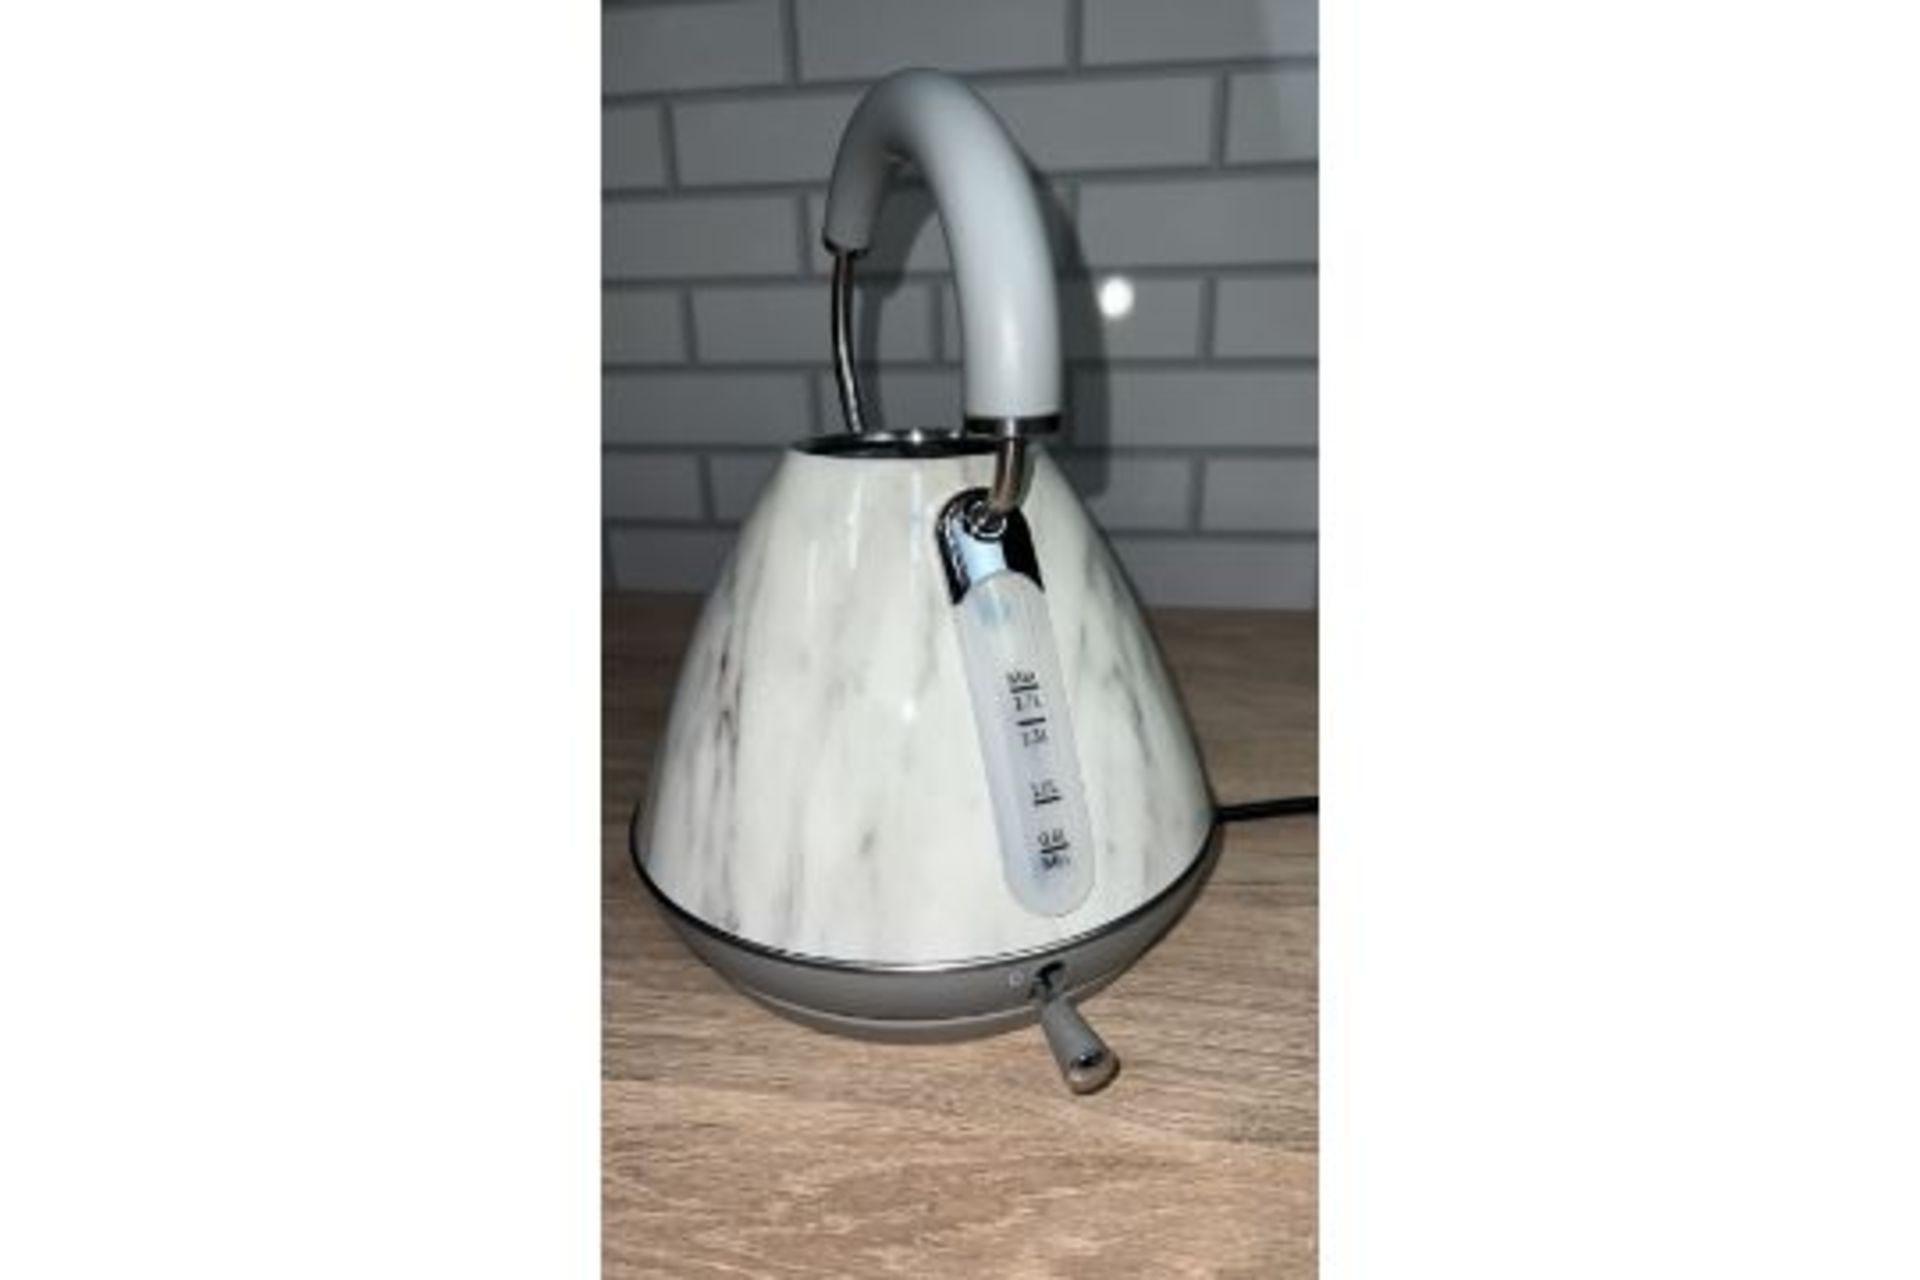 EGL CLASSIC PYRAMID KETTLE - MARBLE - Image 2 of 3